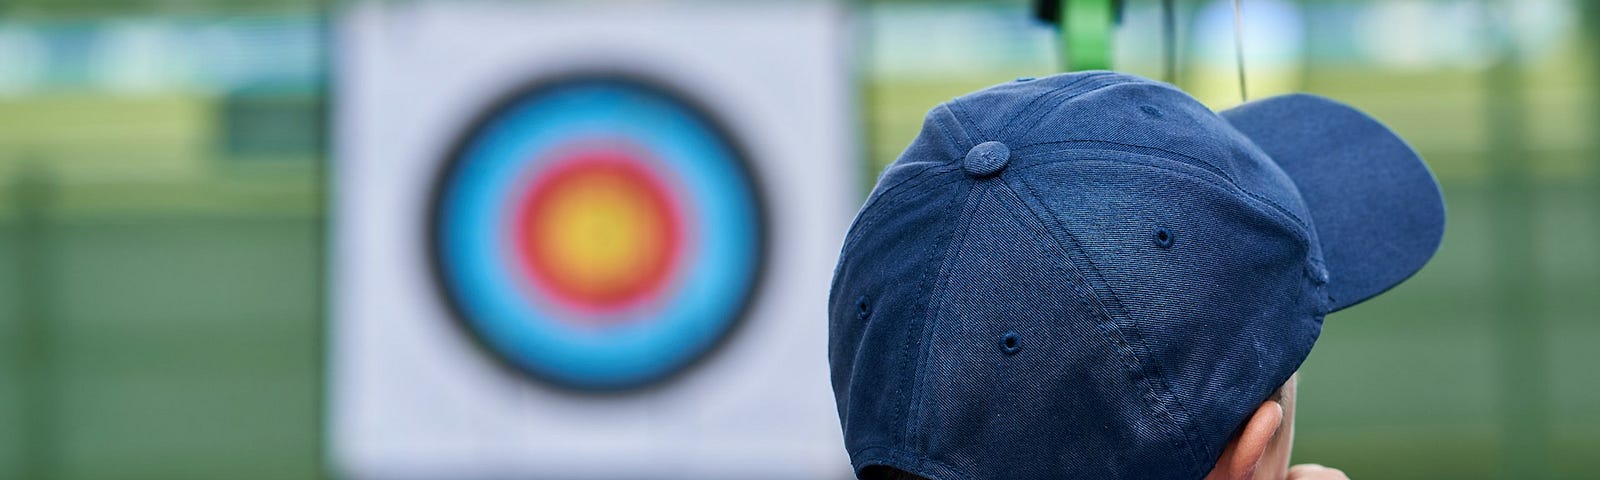 Boy wearing blue cap, blue armband, and white T-shirt aiming his bow and arrow at a target in the background.